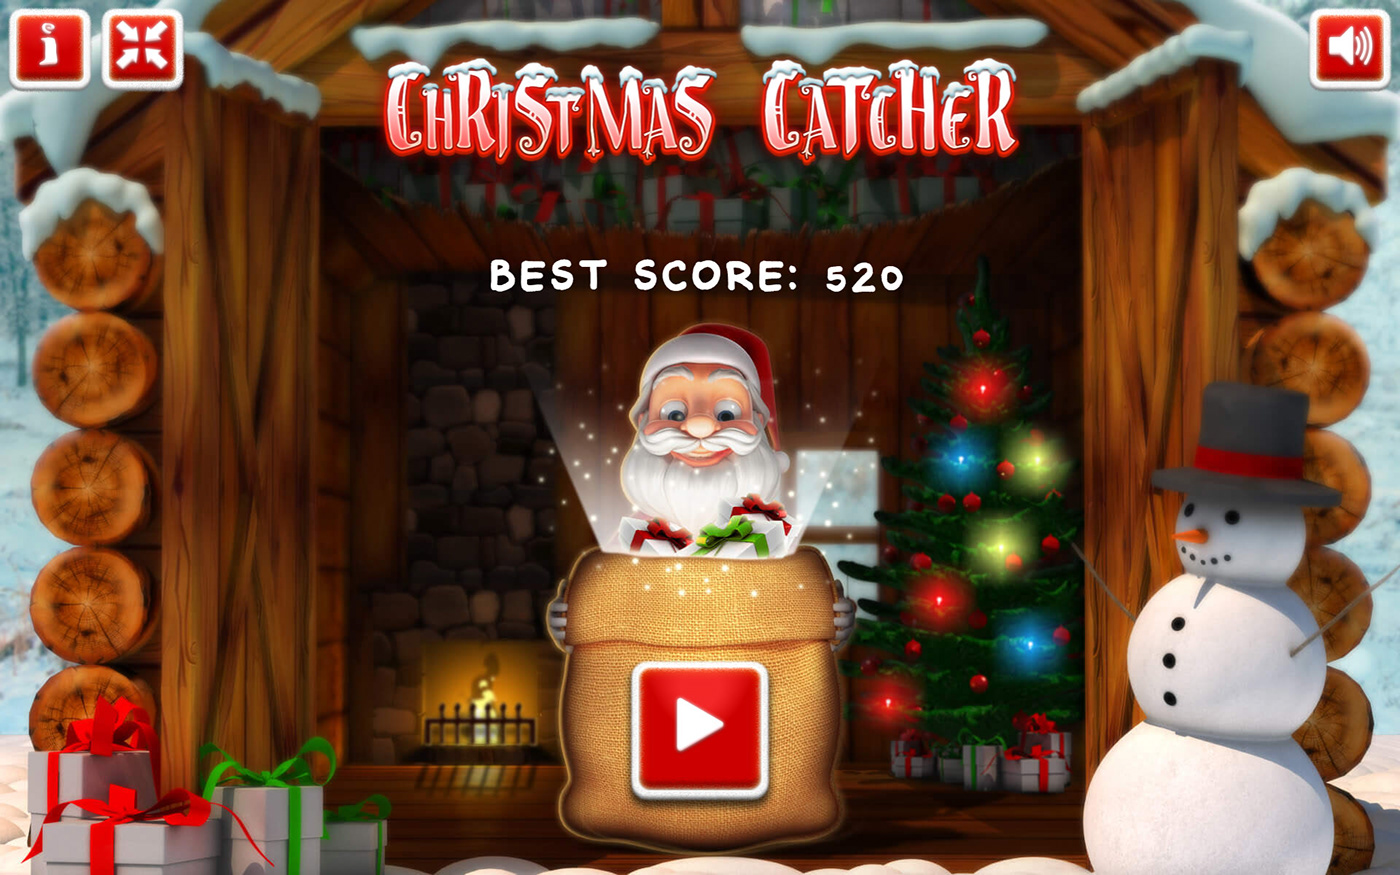 html5 game Christmas xmas advergame seasonal game promotion game catcher game classic game casual game babbo natale